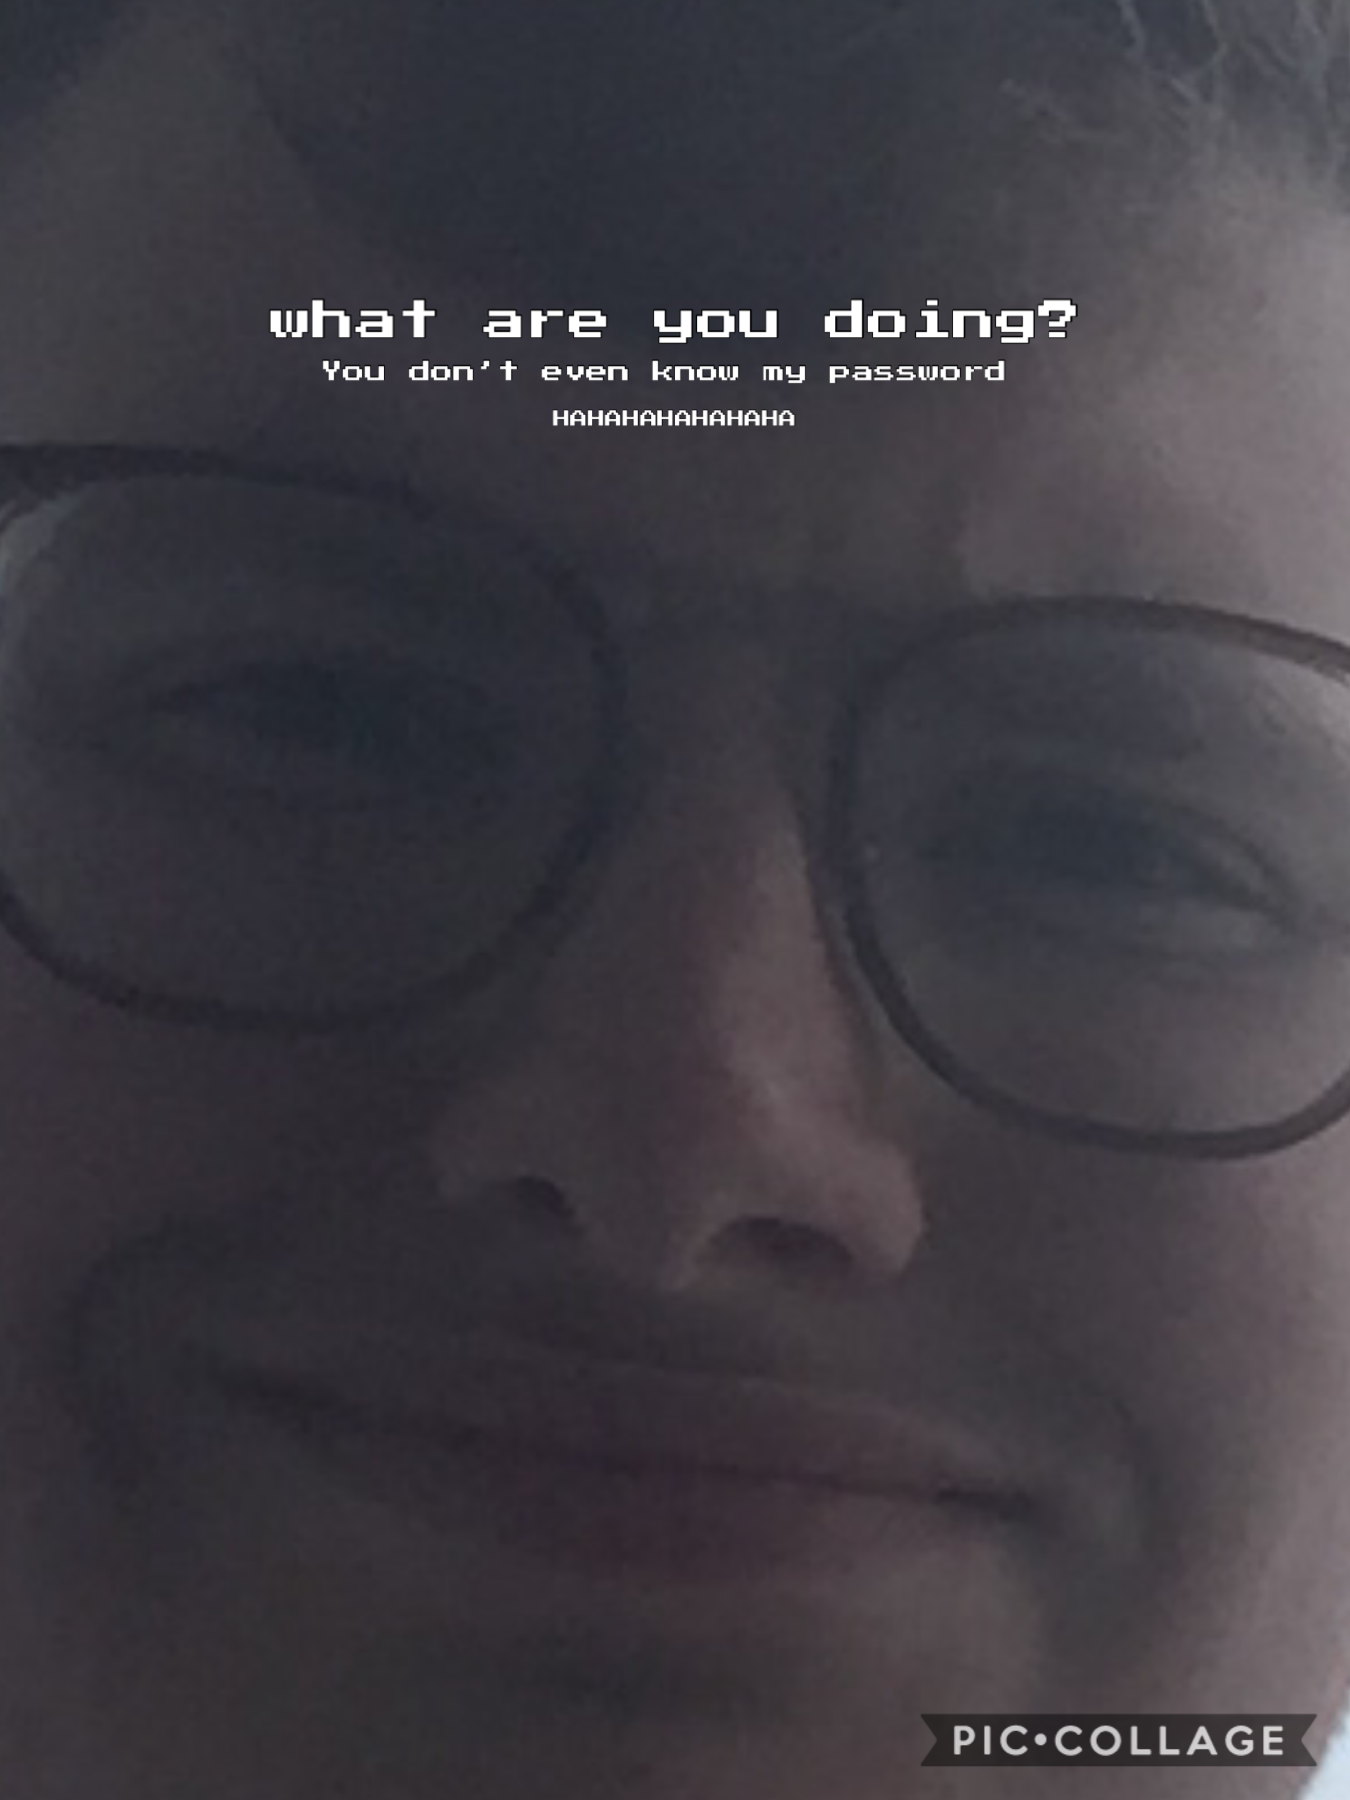 Here is a funny lock screen wallpaper for y’all! (It’s my brother)